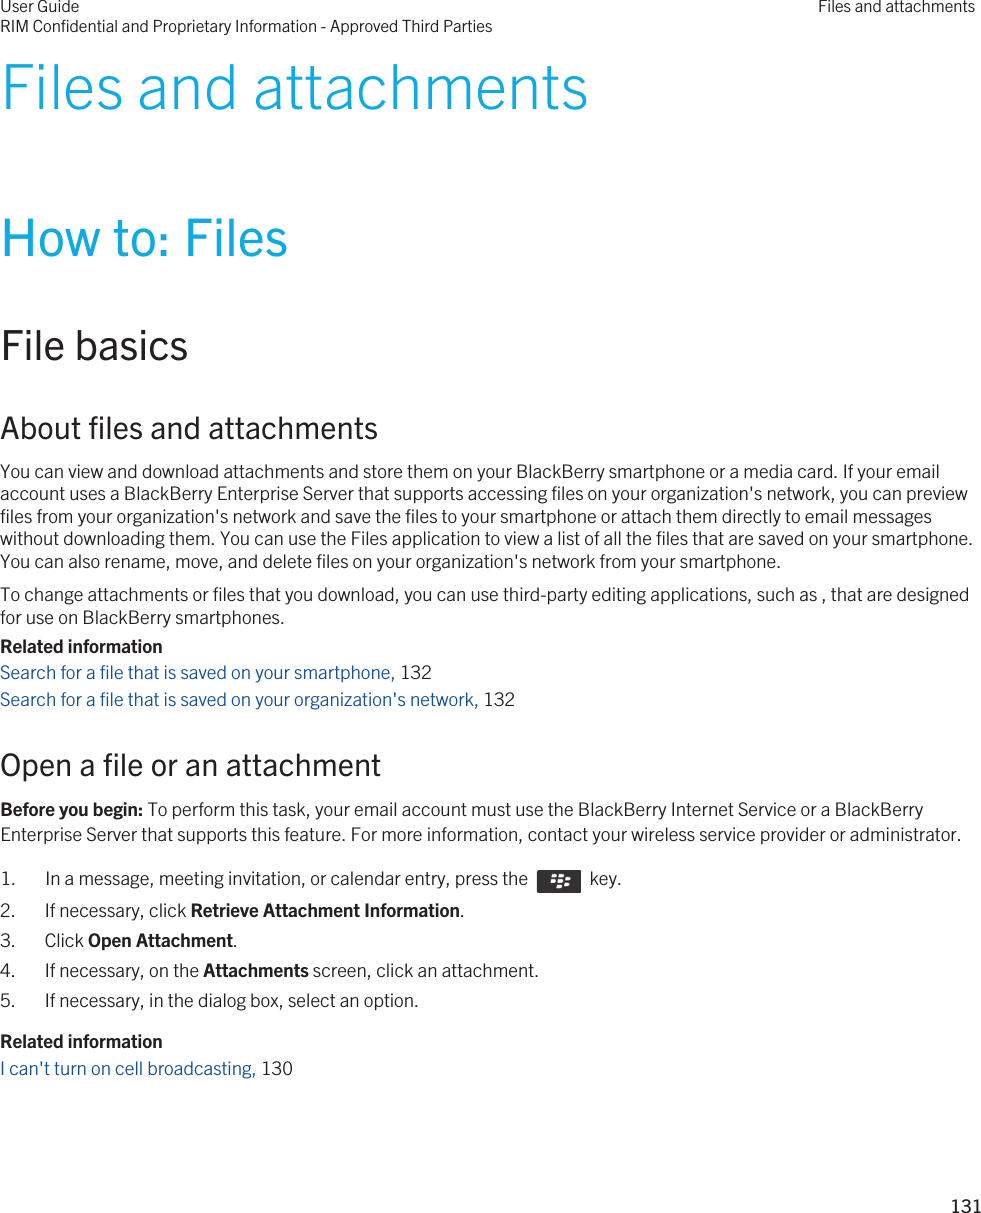 Files and attachmentsHow to: FilesFile basicsAbout files and attachmentsYou can view and download attachments and store them on your BlackBerry smartphone or a media card. If your email account uses a BlackBerry Enterprise Server that supports accessing files on your organization&apos;s network, you can preview files from your organization&apos;s network and save the files to your smartphone or attach them directly to email messages without downloading them. You can use the Files application to view a list of all the files that are saved on your smartphone. You can also rename, move, and delete files on your organization&apos;s network from your smartphone.To change attachments or files that you download, you can use third-party editing applications, such as , that are designed for use on BlackBerry smartphones.Related informationSearch for a file that is saved on your smartphone, 132Search for a file that is saved on your organization&apos;s network, 132Open a file or an attachmentBefore you begin: To perform this task, your email account must use the BlackBerry Internet Service or a BlackBerry Enterprise Server that supports this feature. For more information, contact your wireless service provider or administrator. 1.  In a message, meeting invitation, or calendar entry, press the    key. 2. If necessary, click Retrieve Attachment Information.3. Click Open Attachment.4. If necessary, on the Attachments screen, click an attachment.5. If necessary, in the dialog box, select an option.Related informationI can&apos;t turn on cell broadcasting, 130 User GuideRIM Confidential and Proprietary Information - Approved Third PartiesFiles and attachments131 